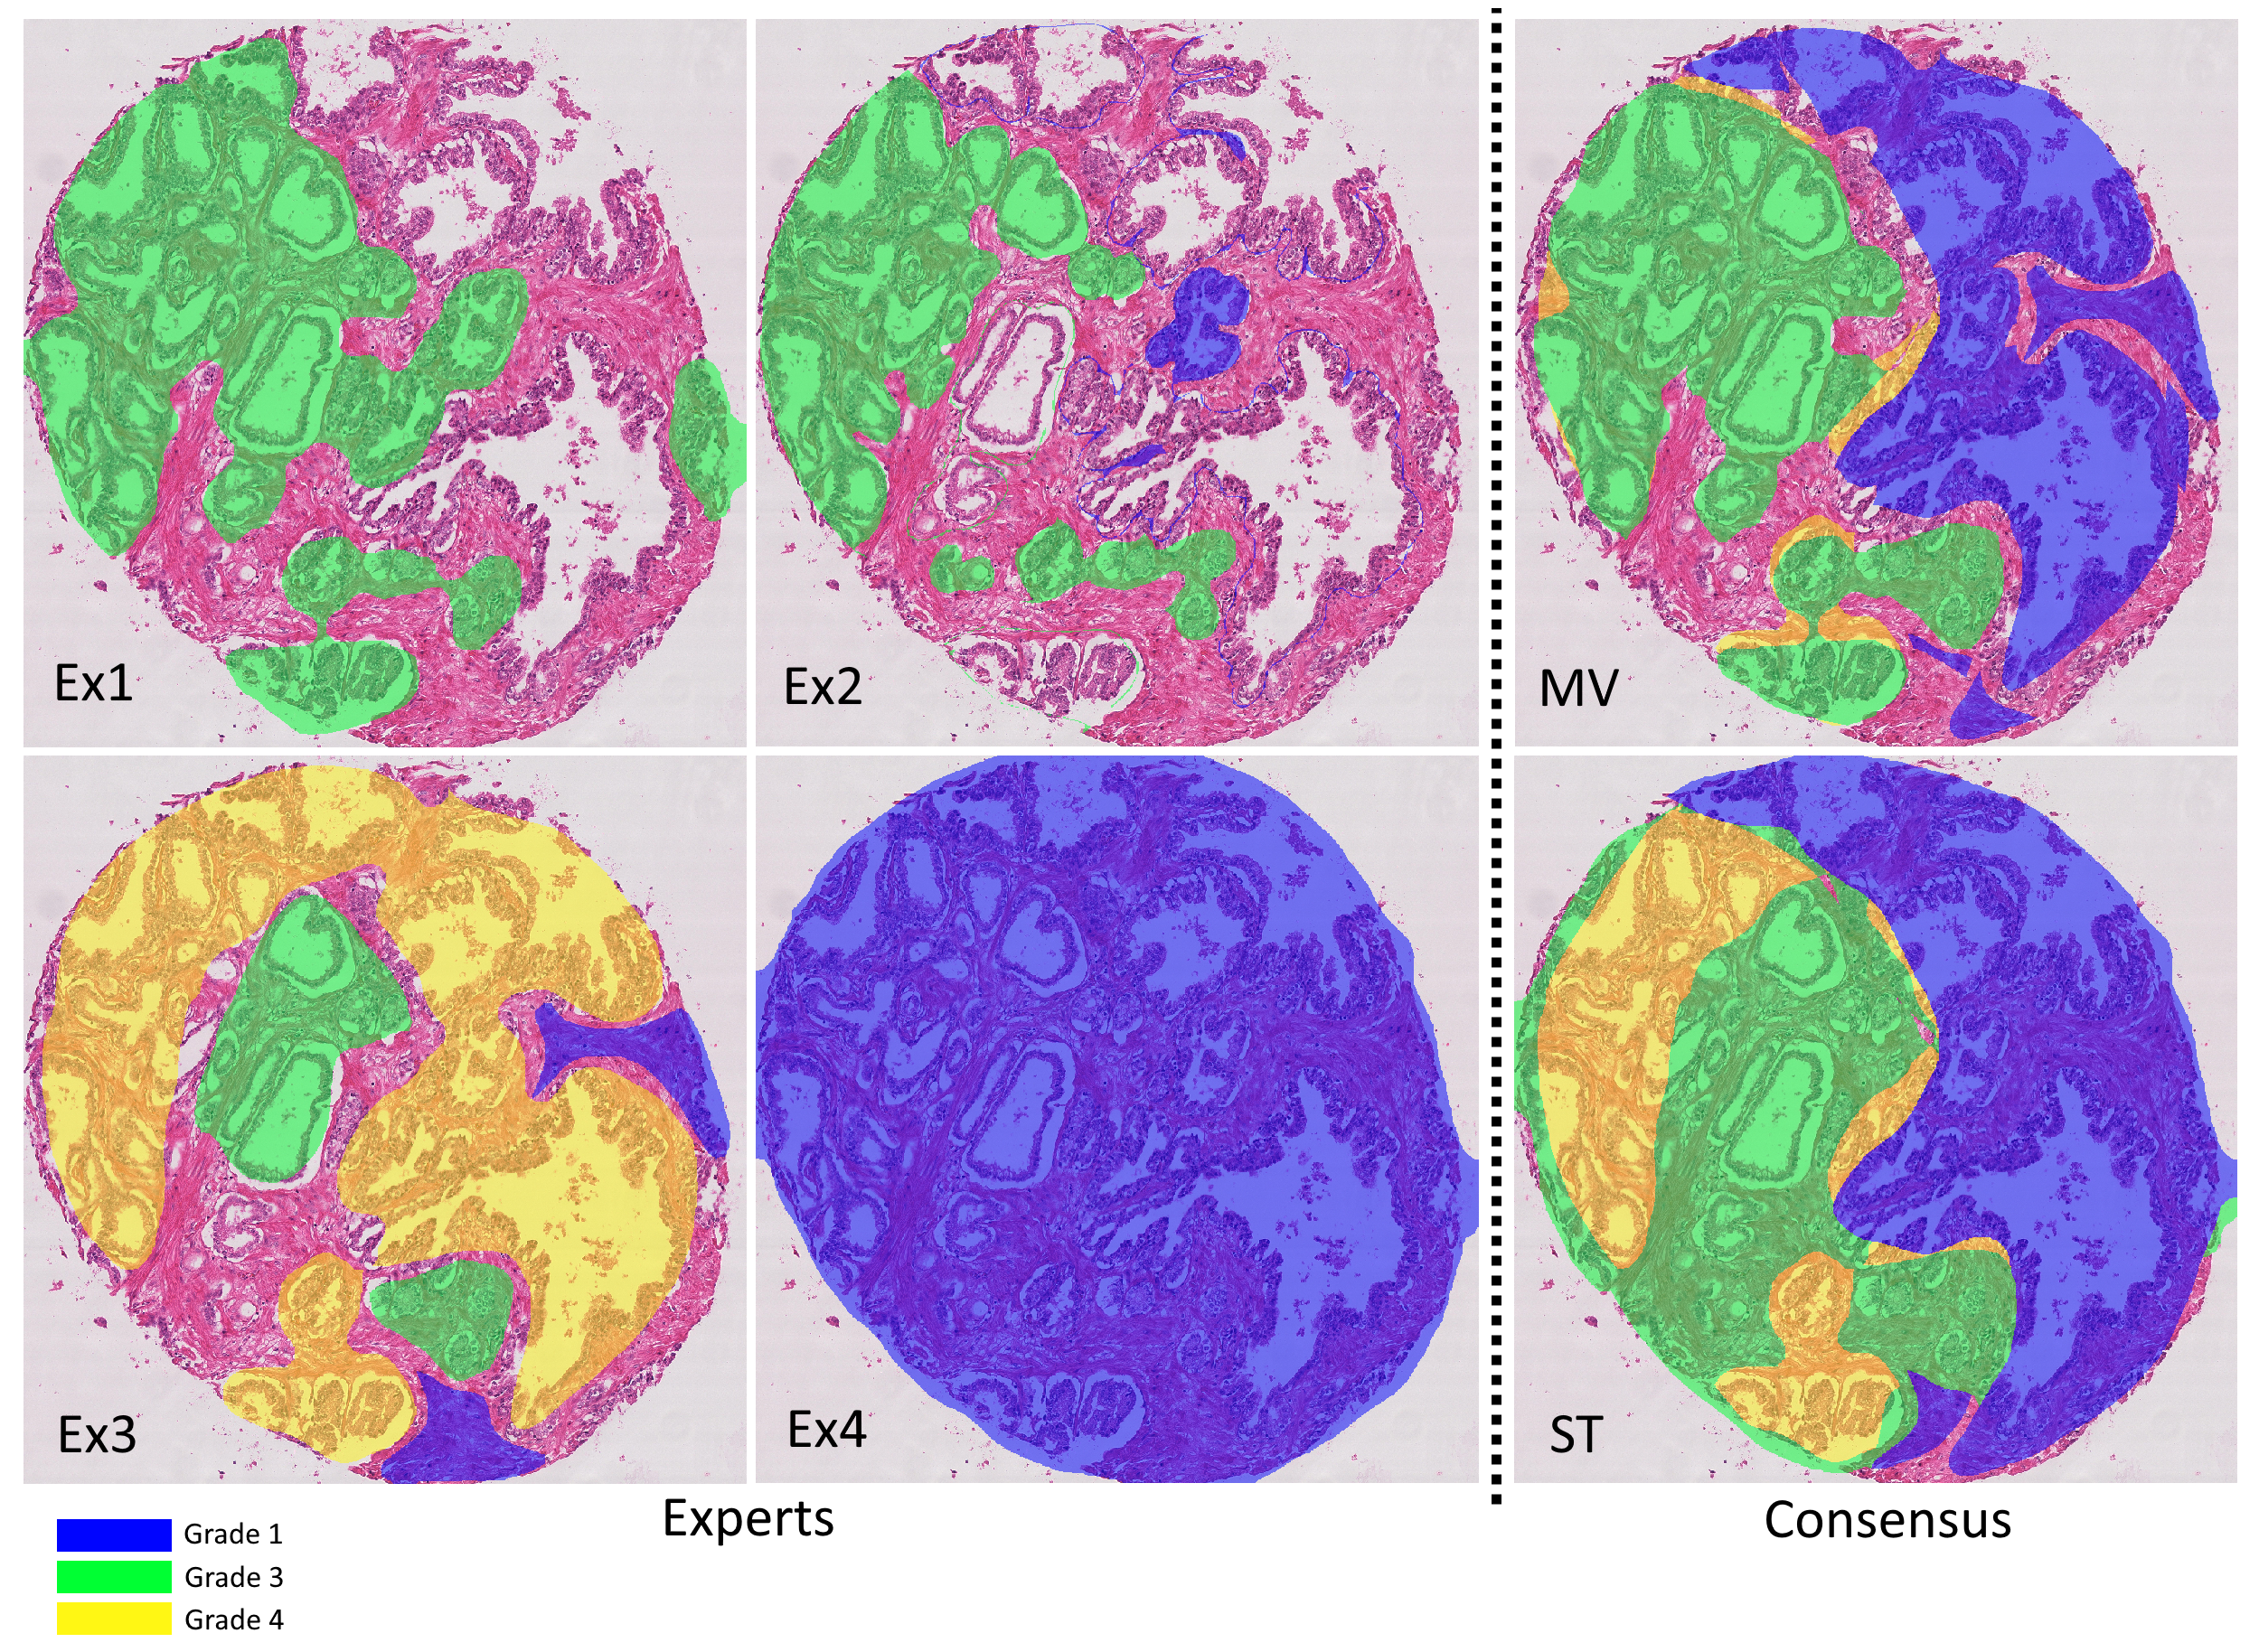 Six different annotation maps for the same core sample: four experts, Majority Vote (MV) and STAPLE (ST). The second expert shows clear mistakes in the annotation with contours (mostly blue and a bit of green) which weren’t properly closed. With the simple pixel counting rule, the core-level scores are 6,4,7,2 (experts) and 4 (both consensus), and the Epstein groups are 1, 1, 3, 1 (experts) and 1 (both consensus). Using the half-area rule, the core-level scores are 6, 6, 8, 2 (experts) and 4 (both consensus), and the Epstein groups are 1, 1, 4, 1 (experts) and 1 (both consensus).